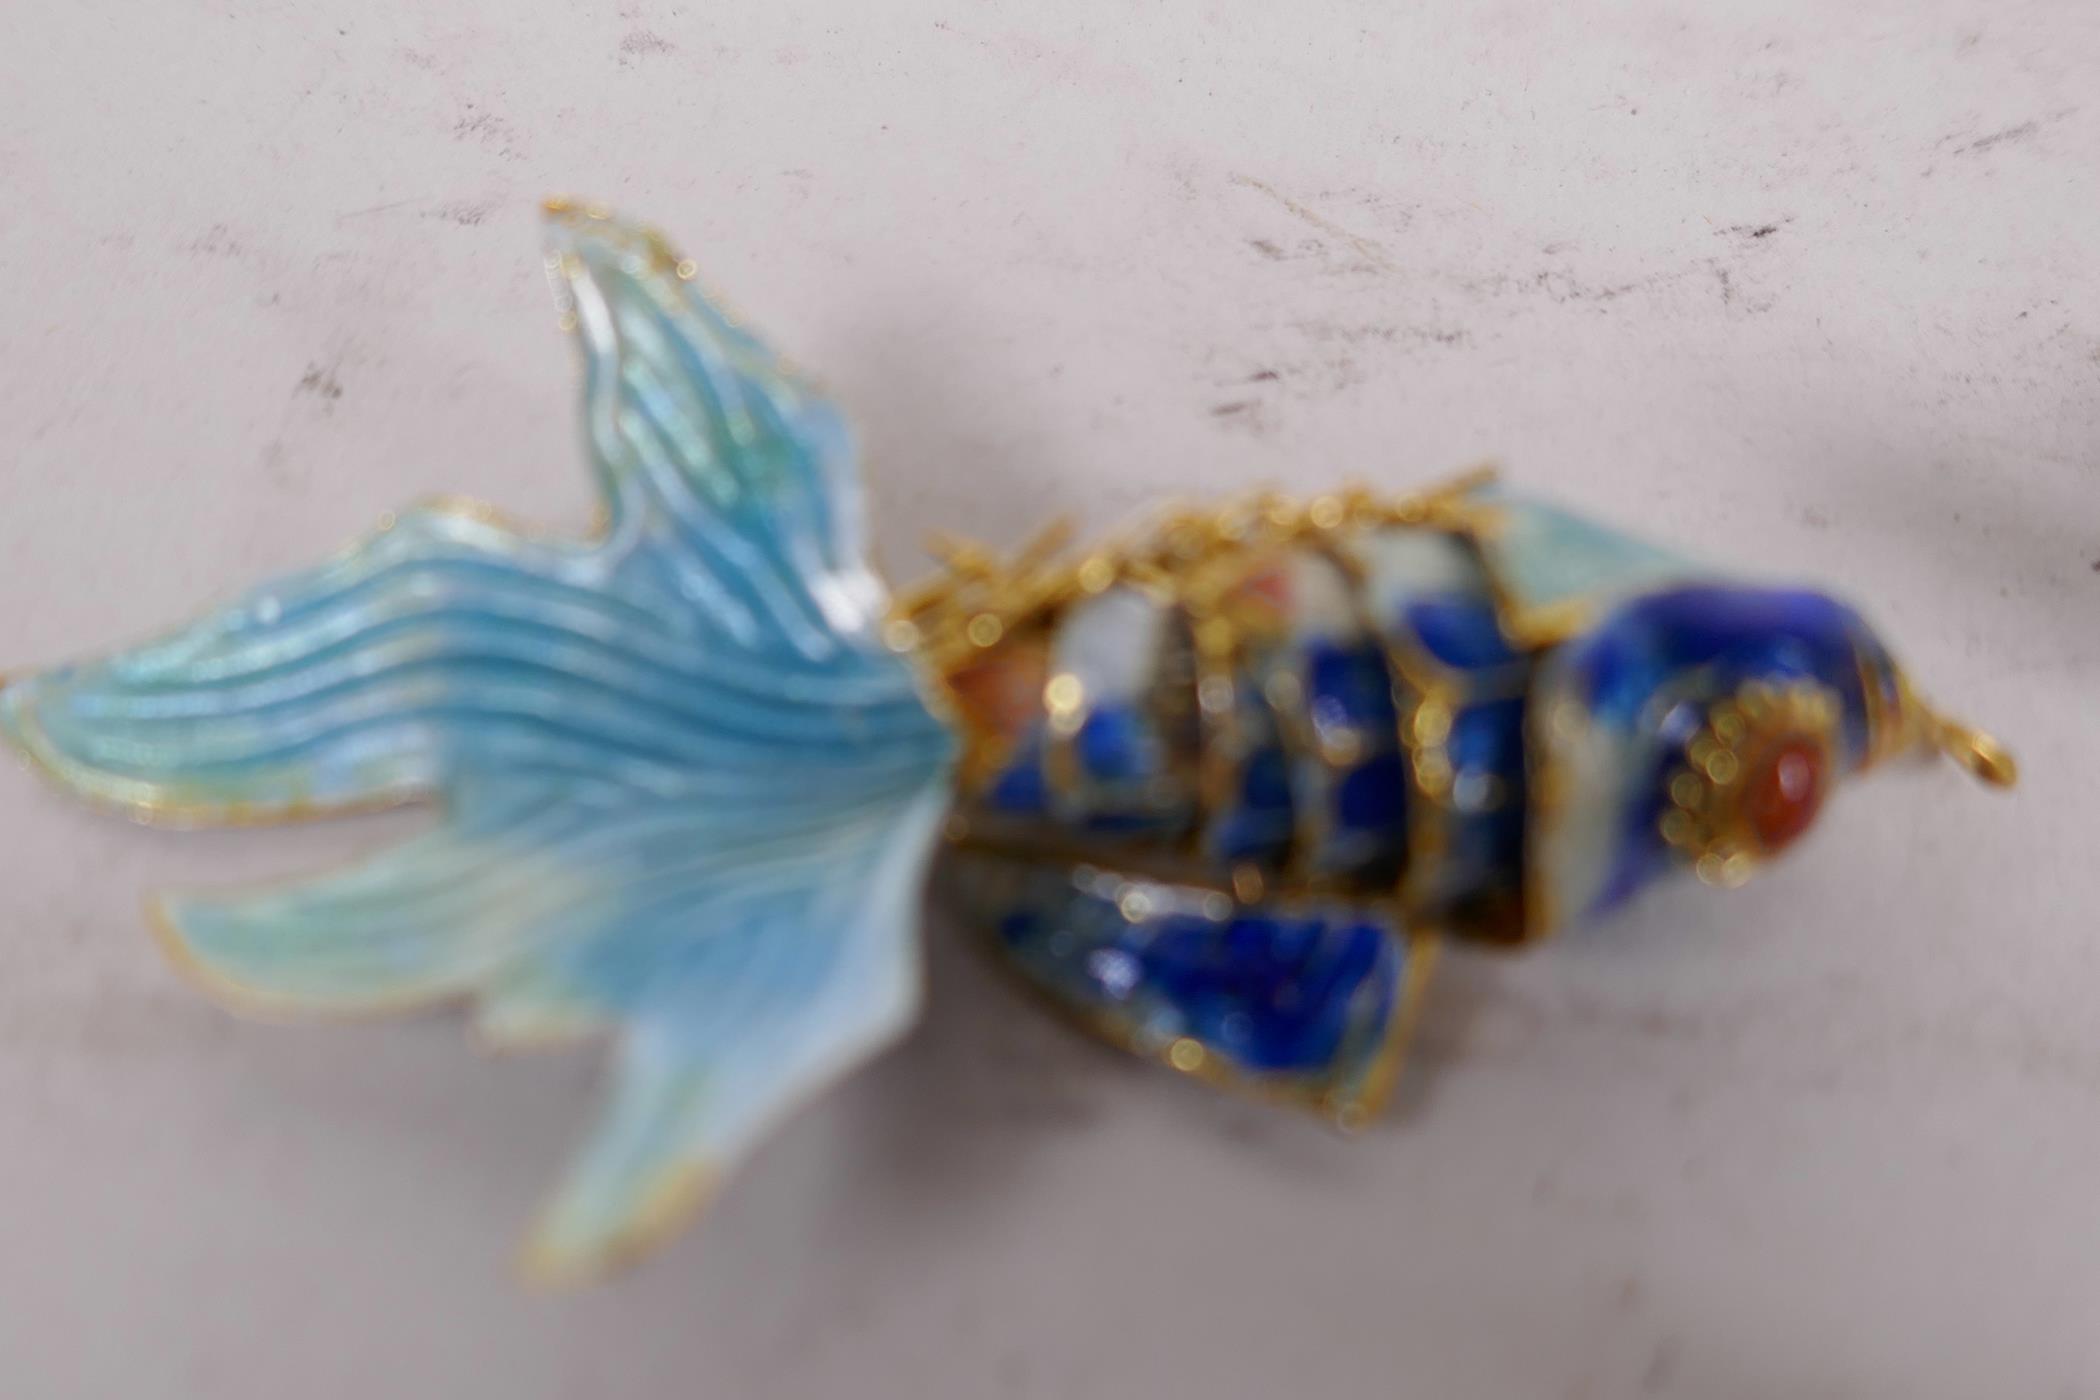 Four articulated enamel fish pendants, 2½" long - Image 4 of 4